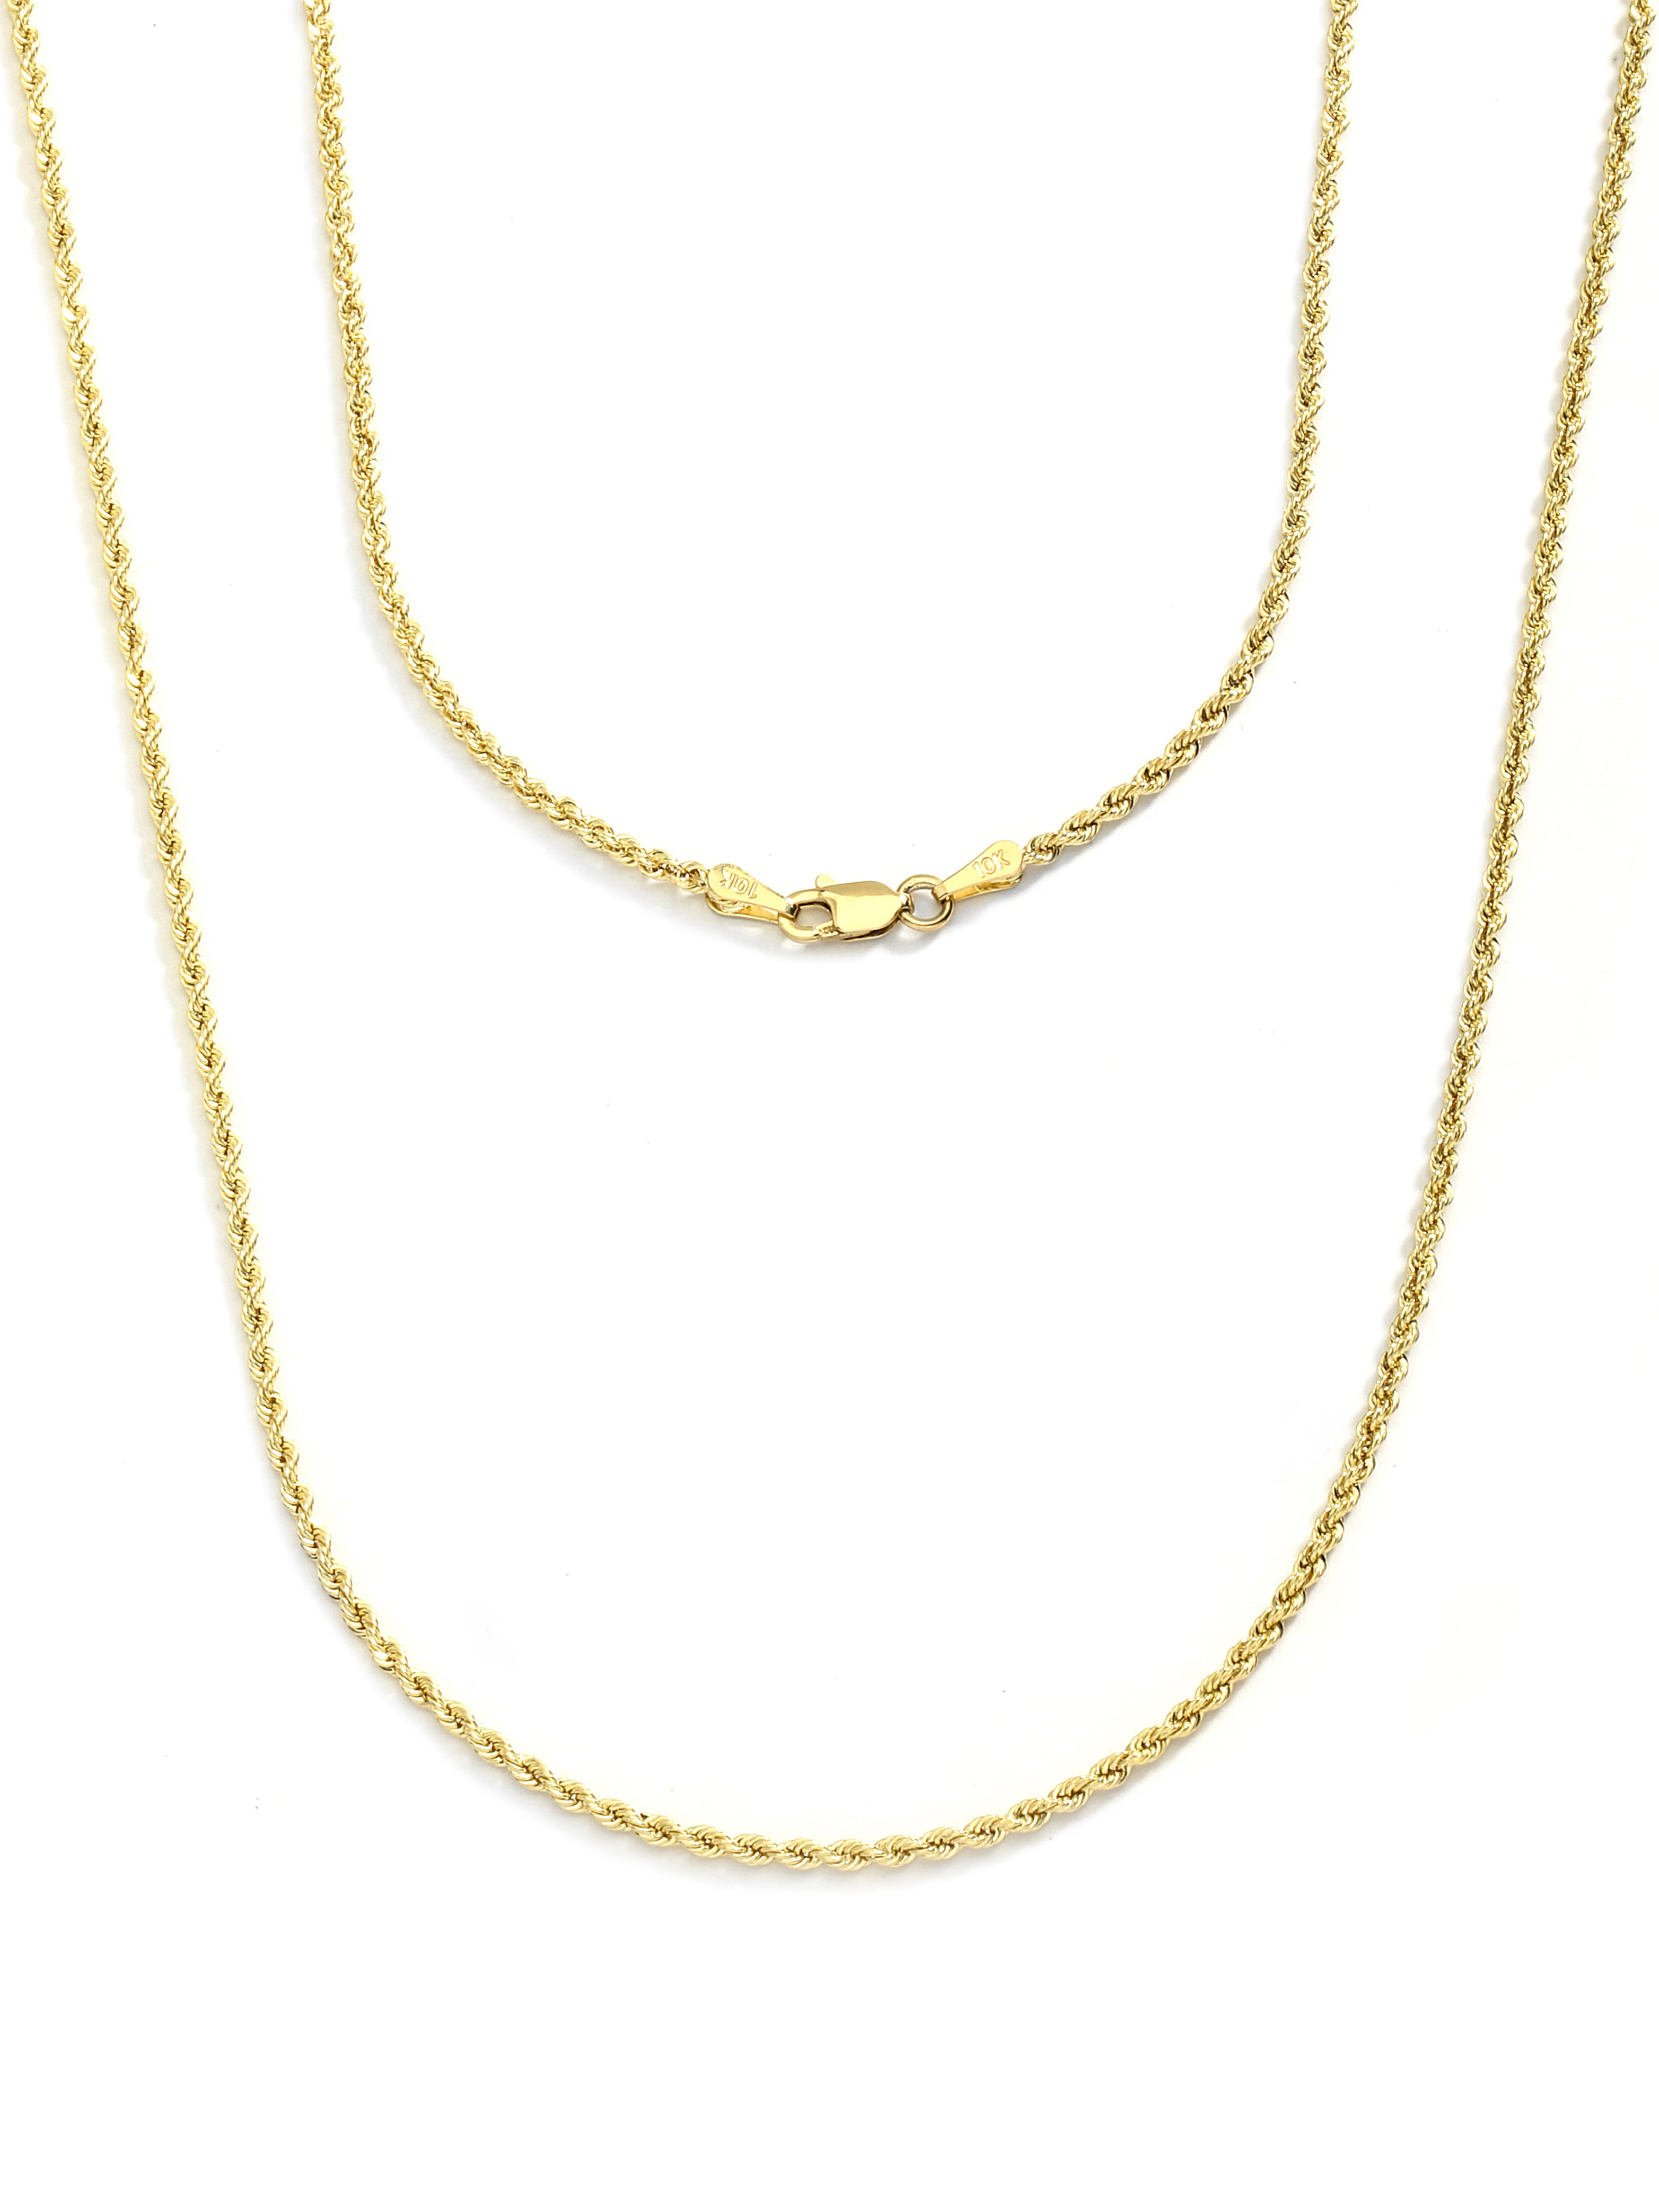 10K Yellow Gold 2.0mm Hollow Rope Chain Necklace Lobster Clasp 